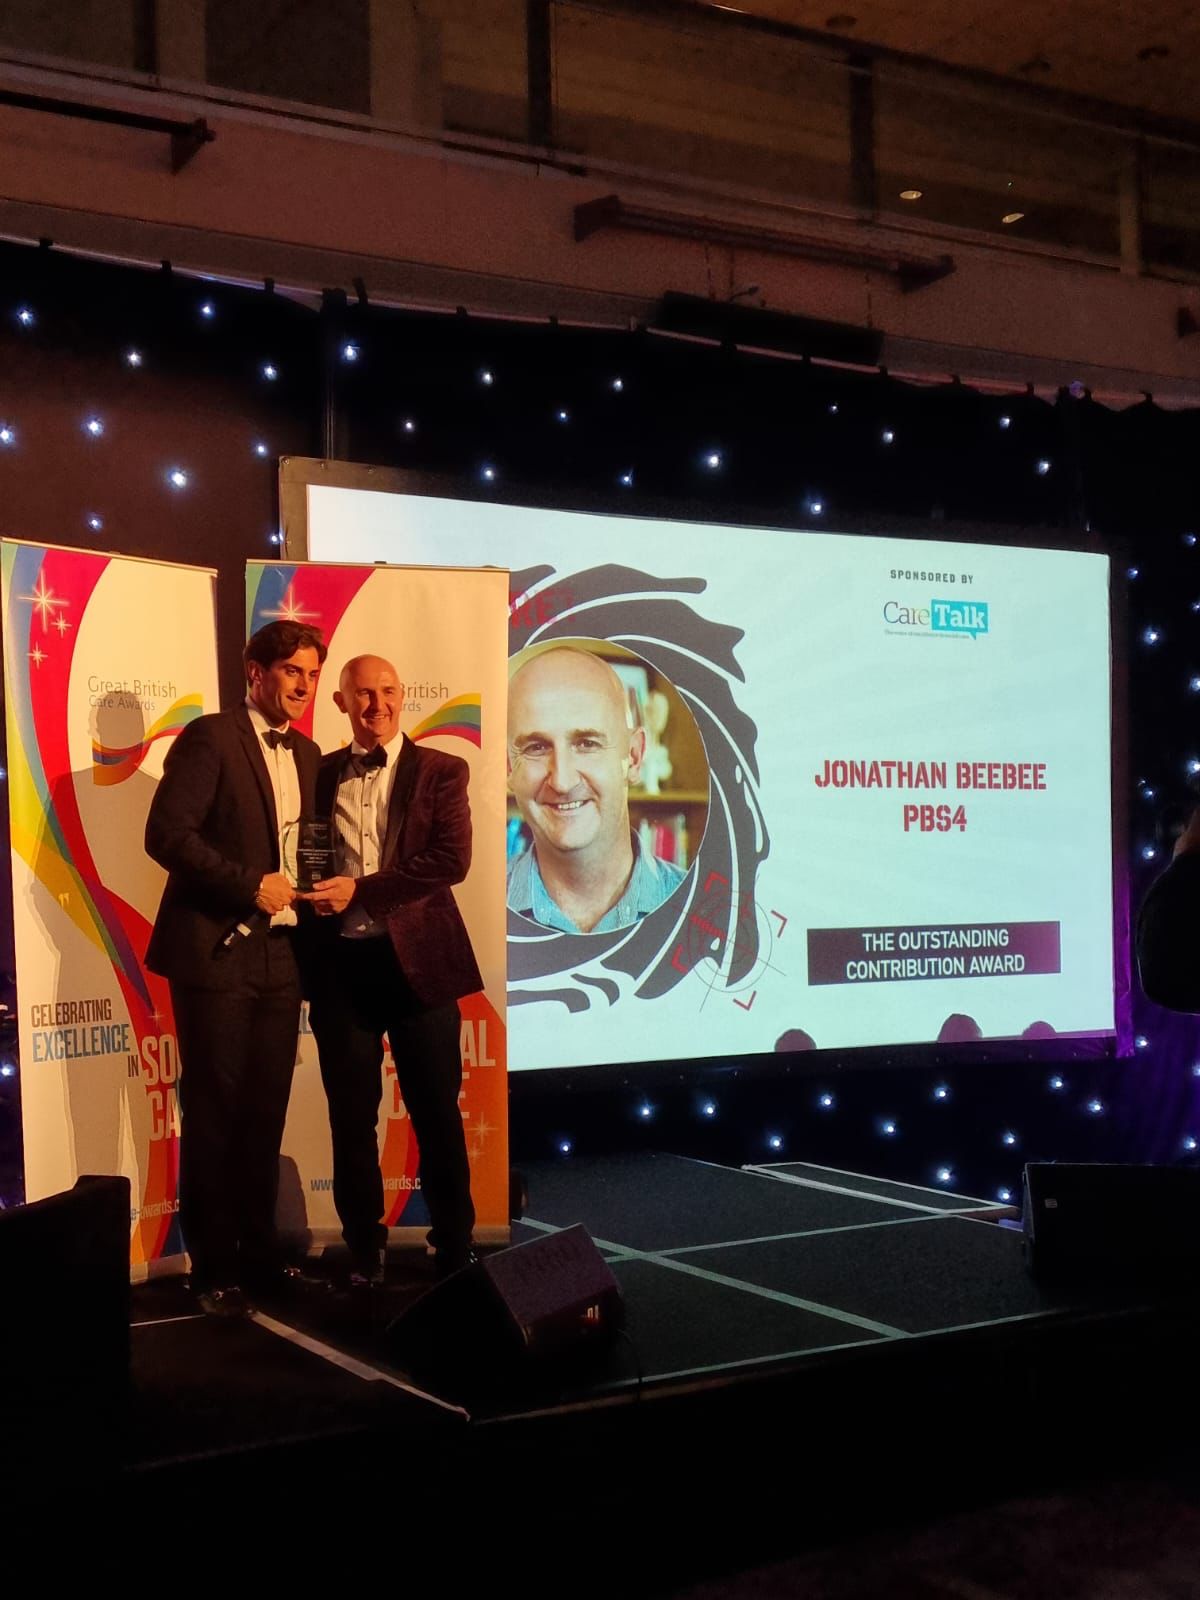 PBS4 CEO, Jonathan Beebee recognised at the Great British Care Awards!